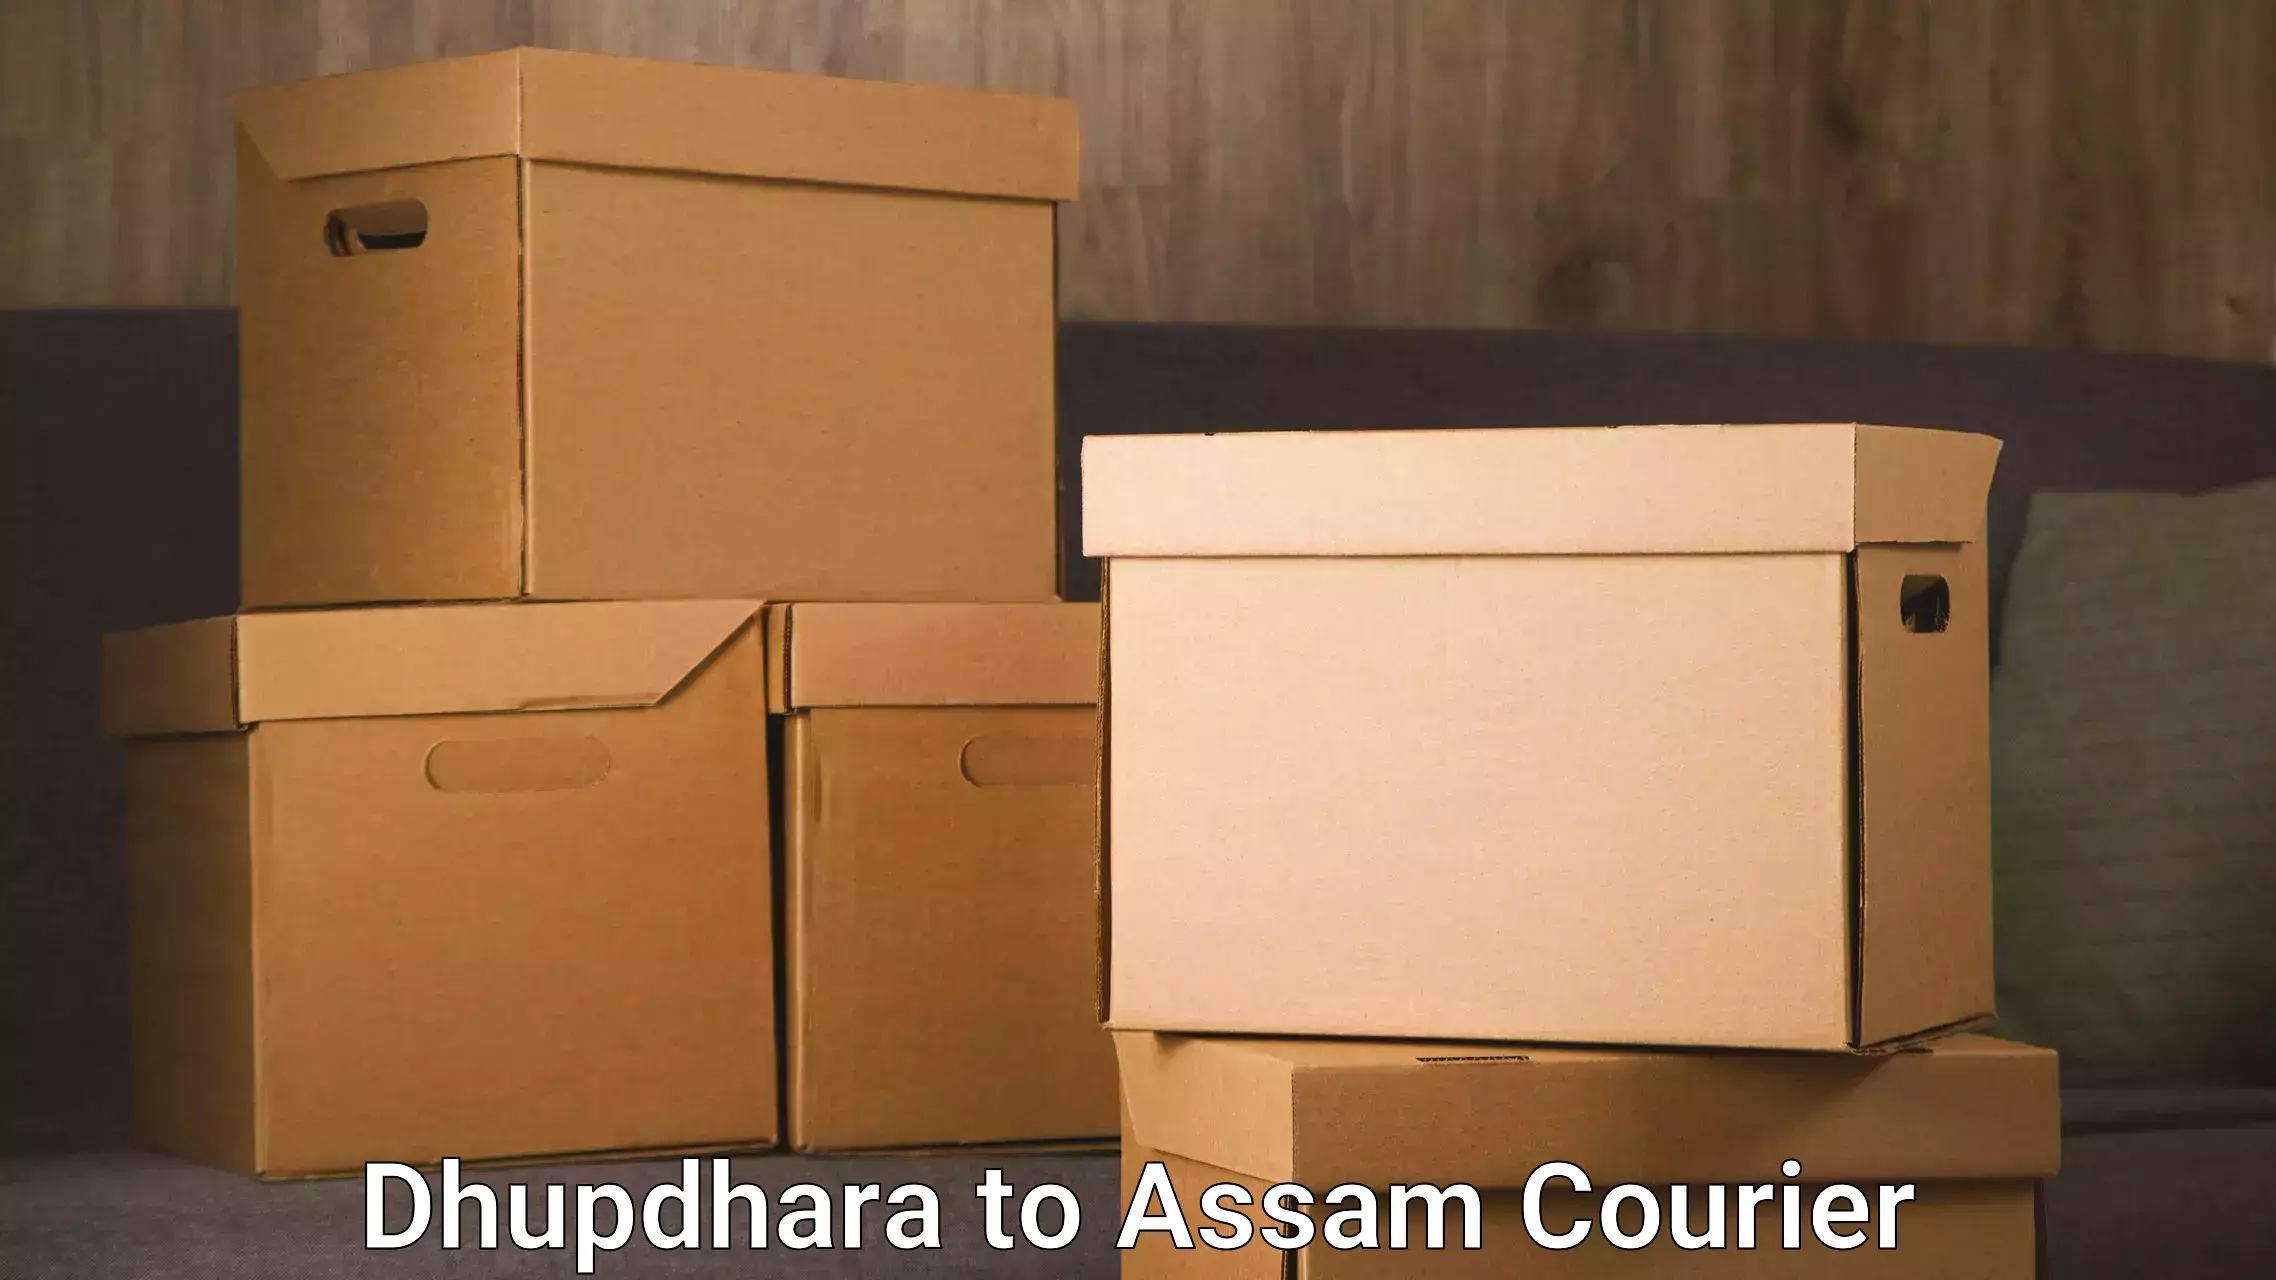 Express delivery capabilities Dhupdhara to Majuli